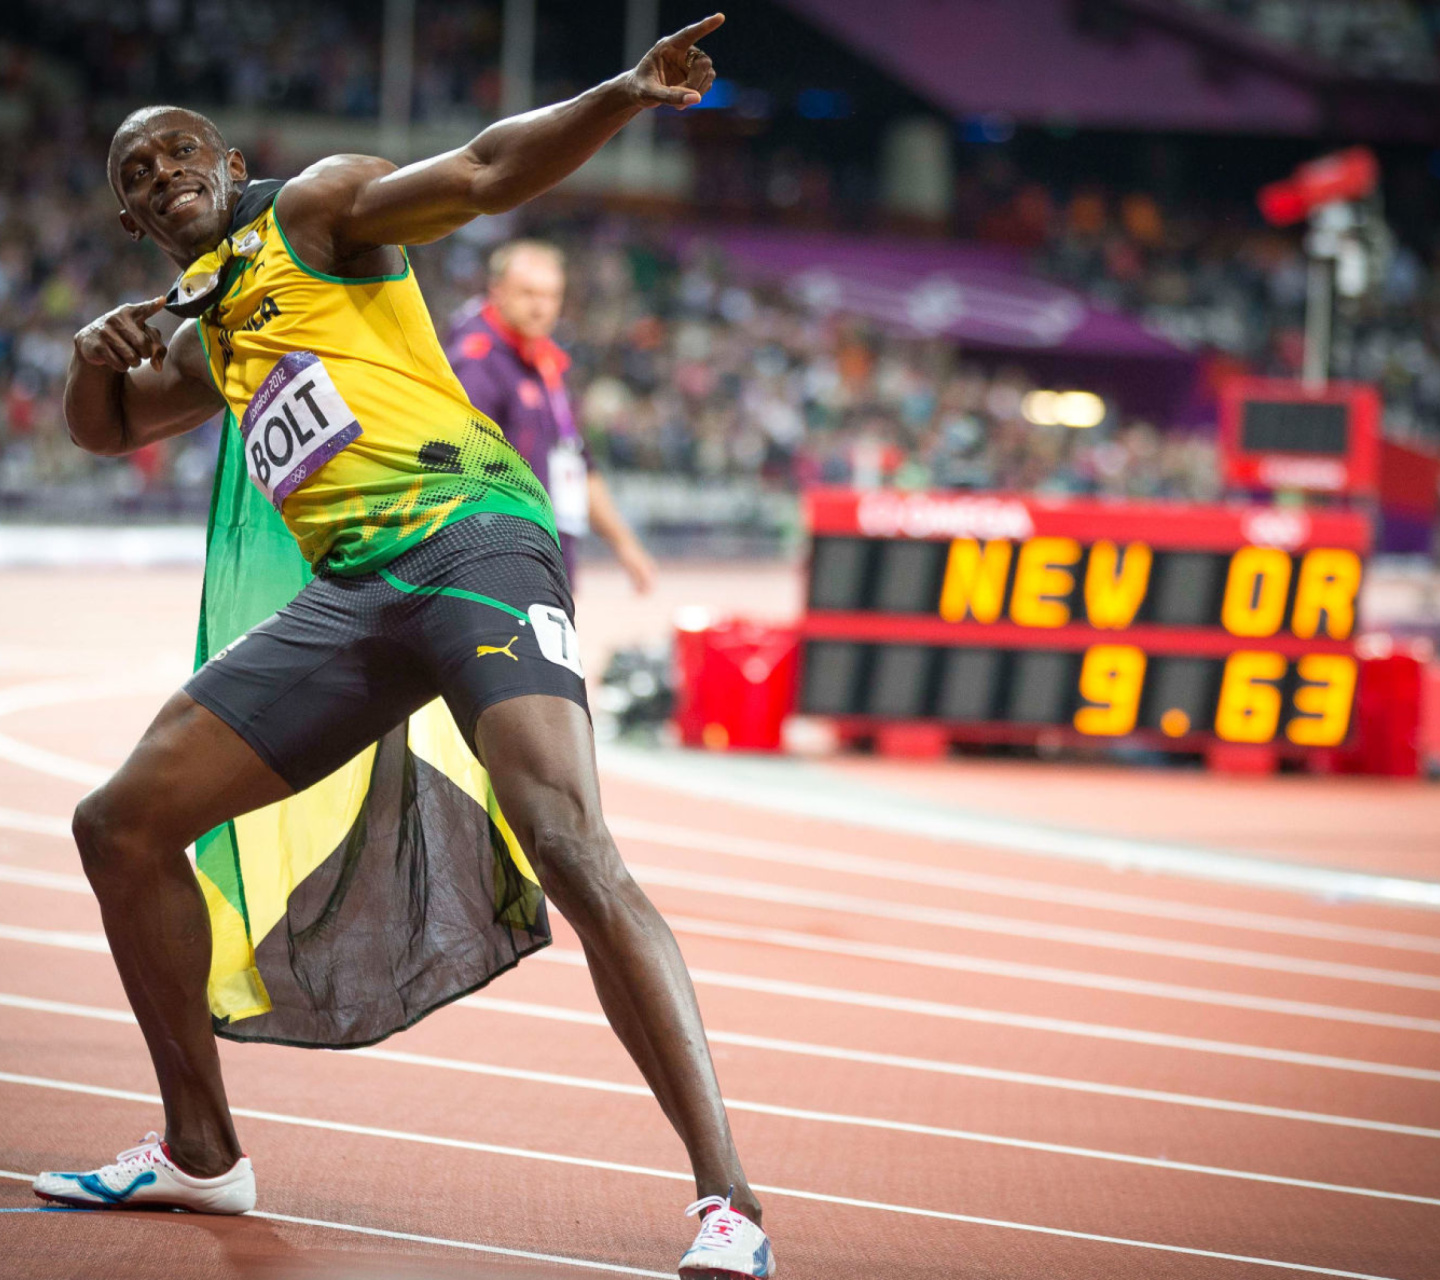 Das Usain Bolt won medals in the Olympics Wallpaper 1440x1280